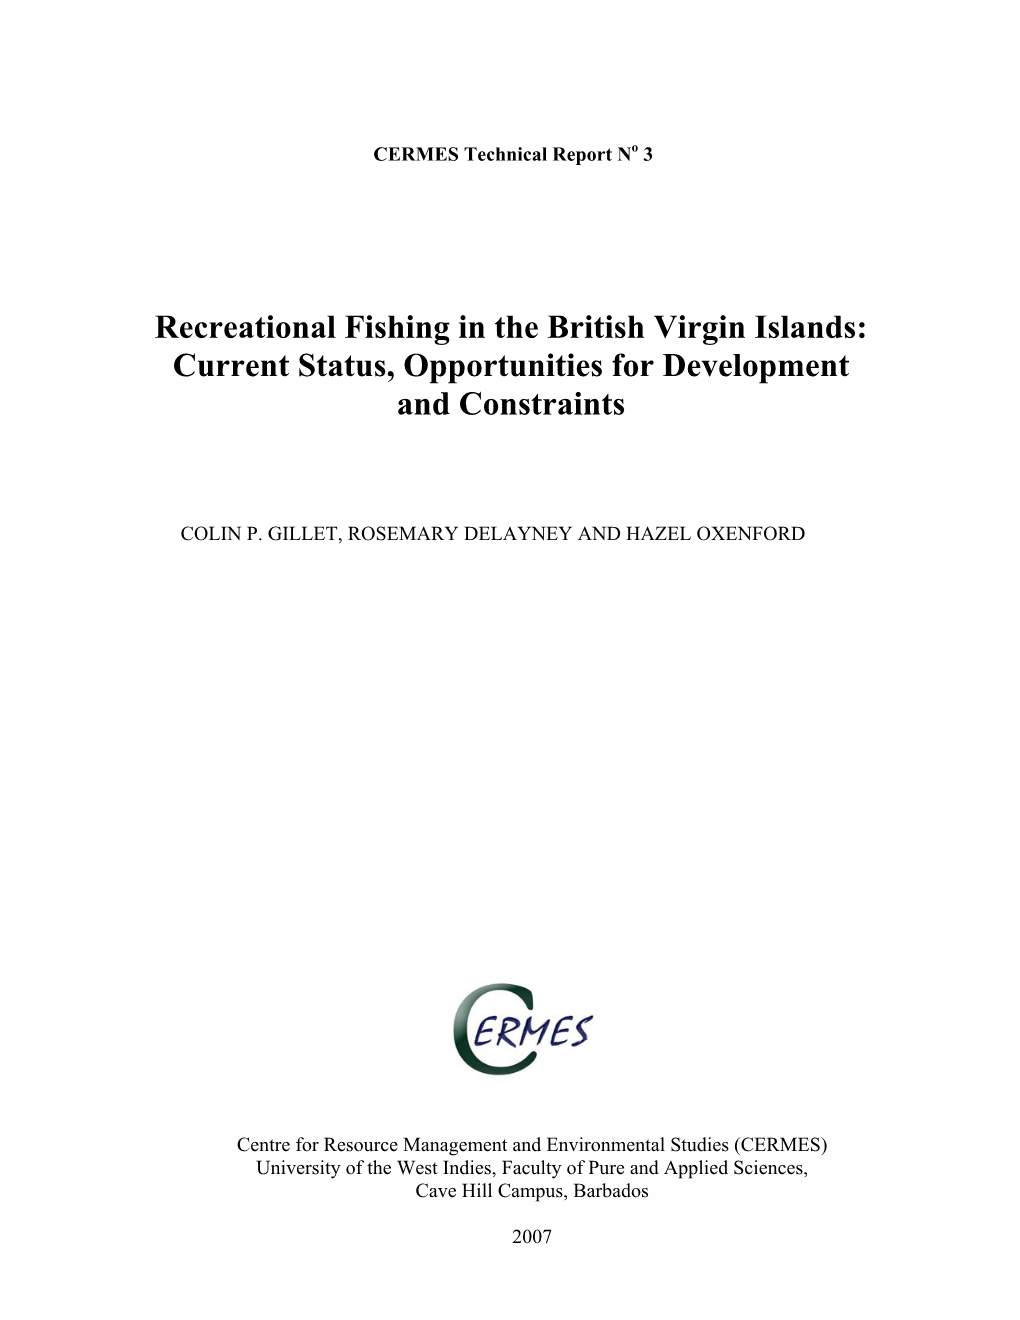 Recreational Fishing in the British Virgin Islands: Current Status, Opportunities for Development and Constraints COLIN P